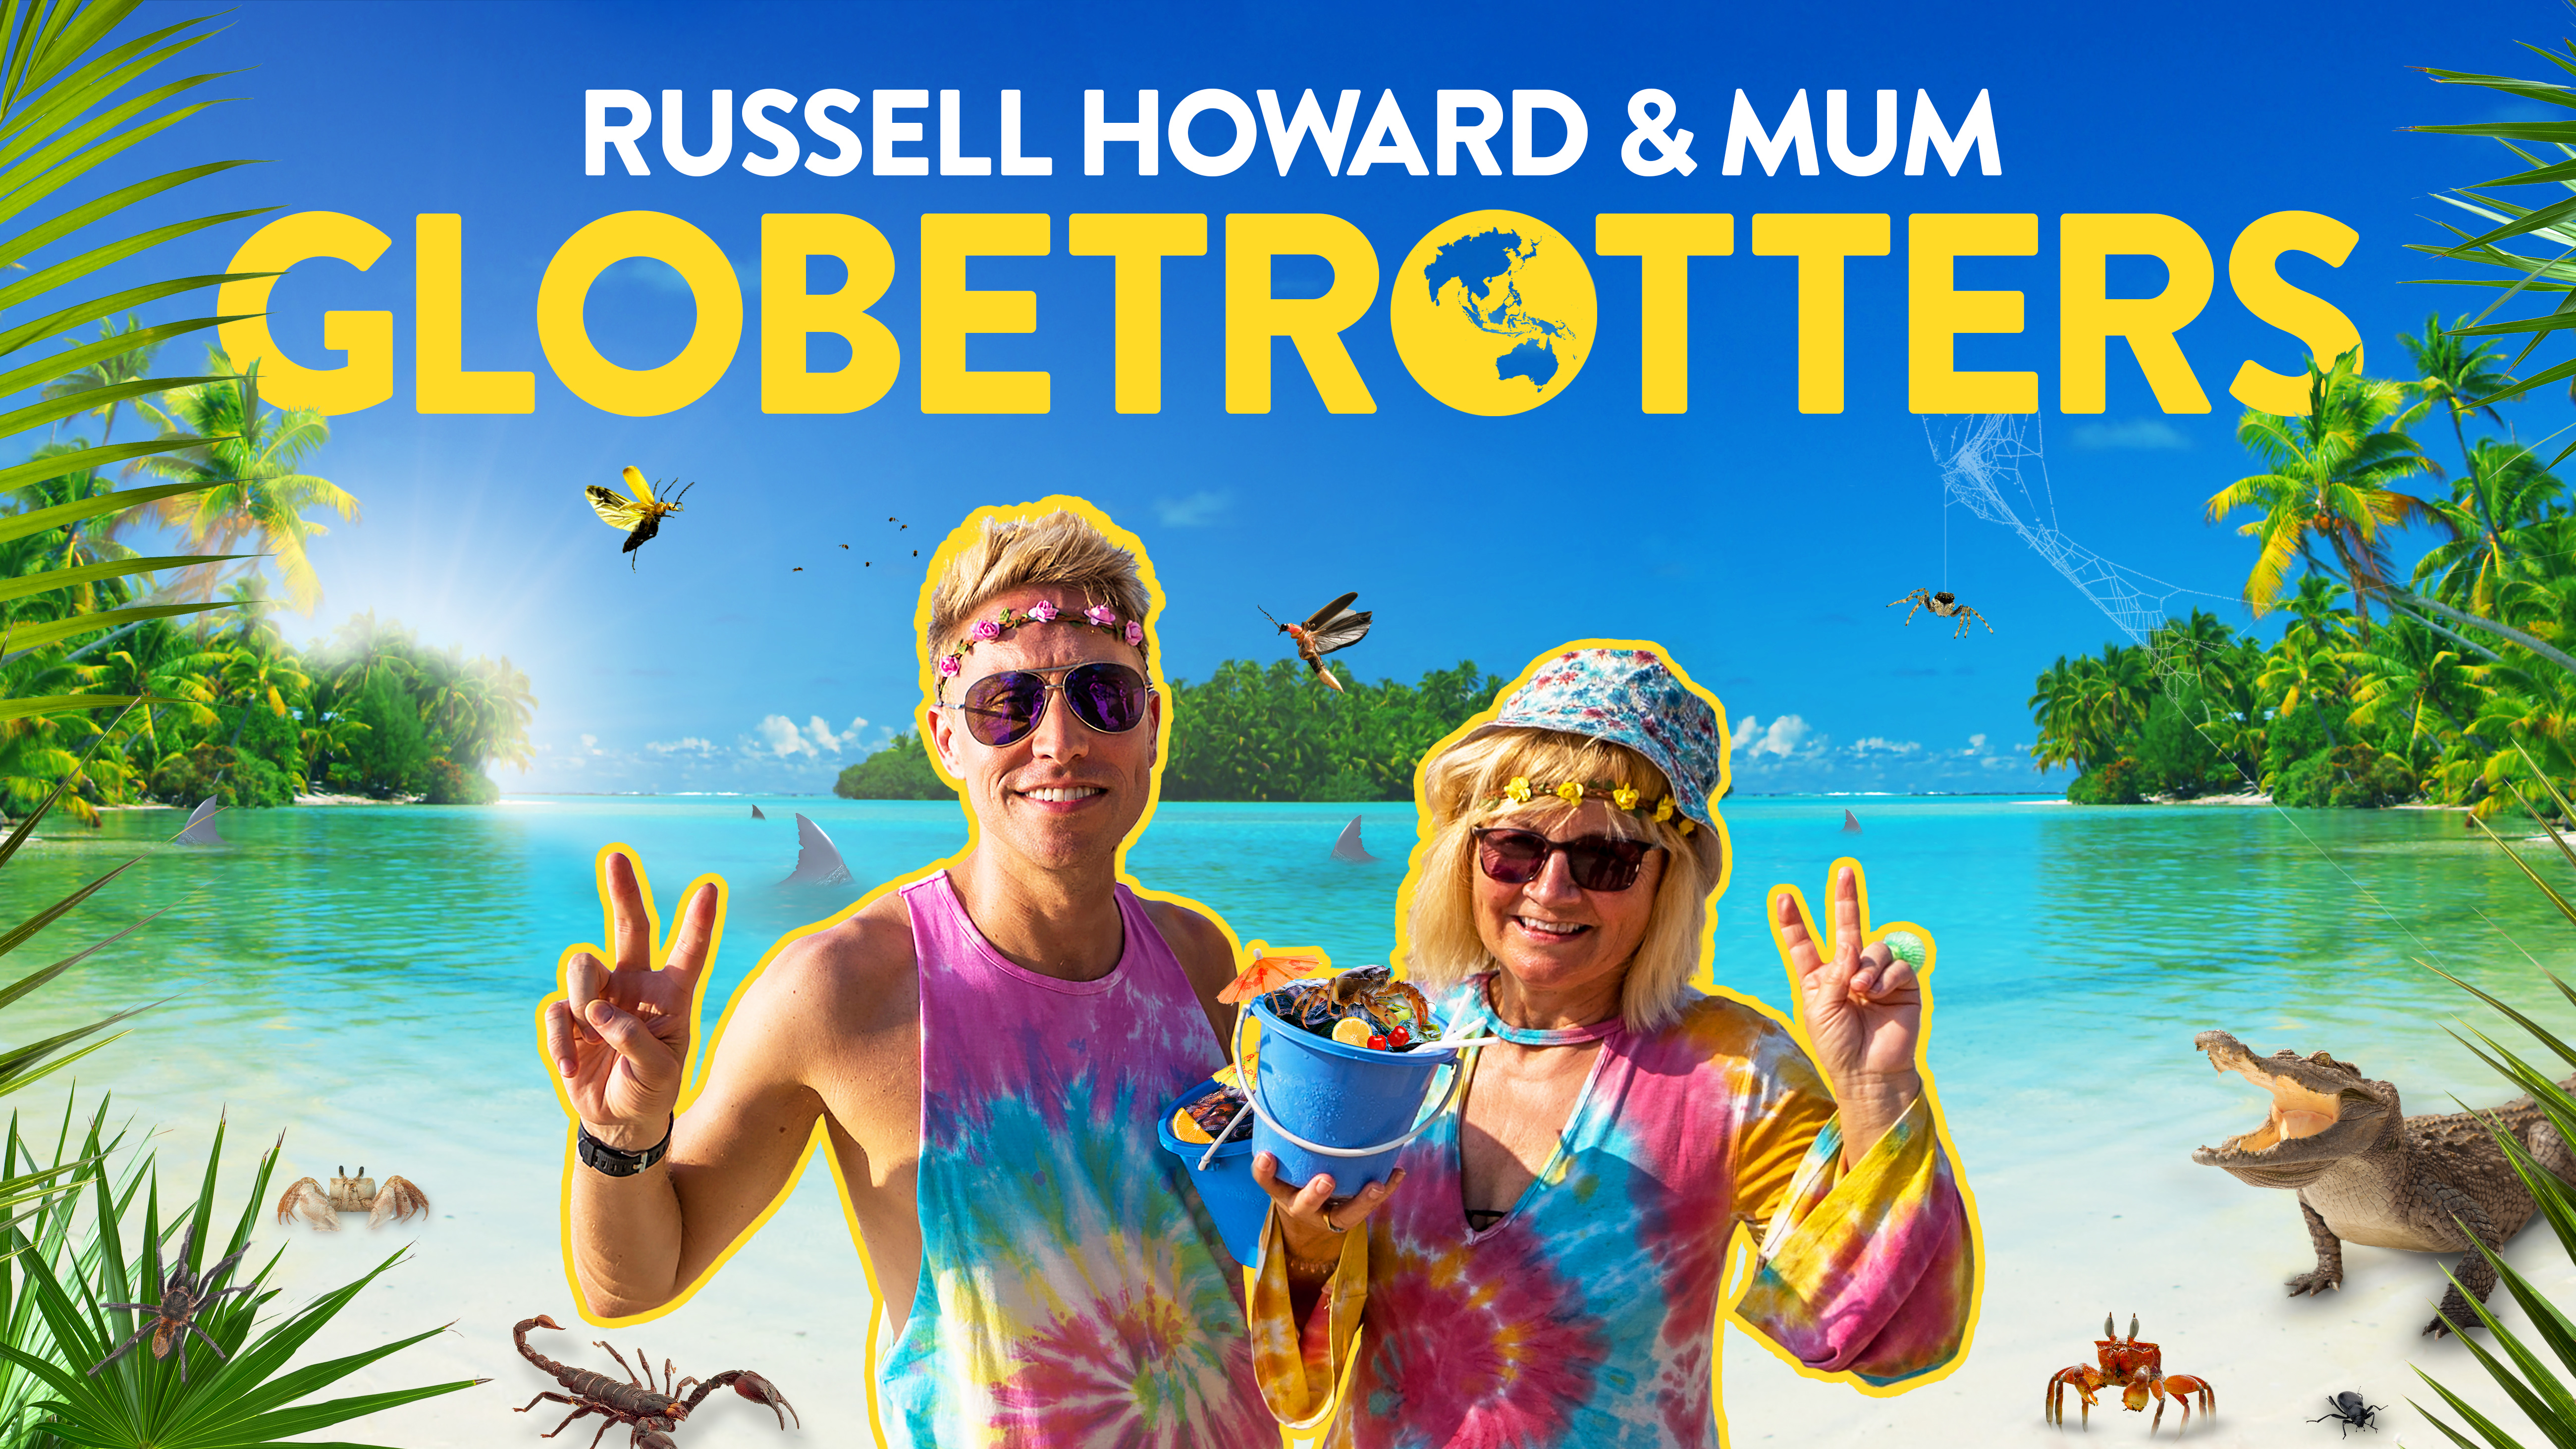 RUSSELL HOWARD AND MUM: GLOBETROTTERS PREMIERES ON COMEDY CENTRAL UK 23RD JANUARY AT 10PM